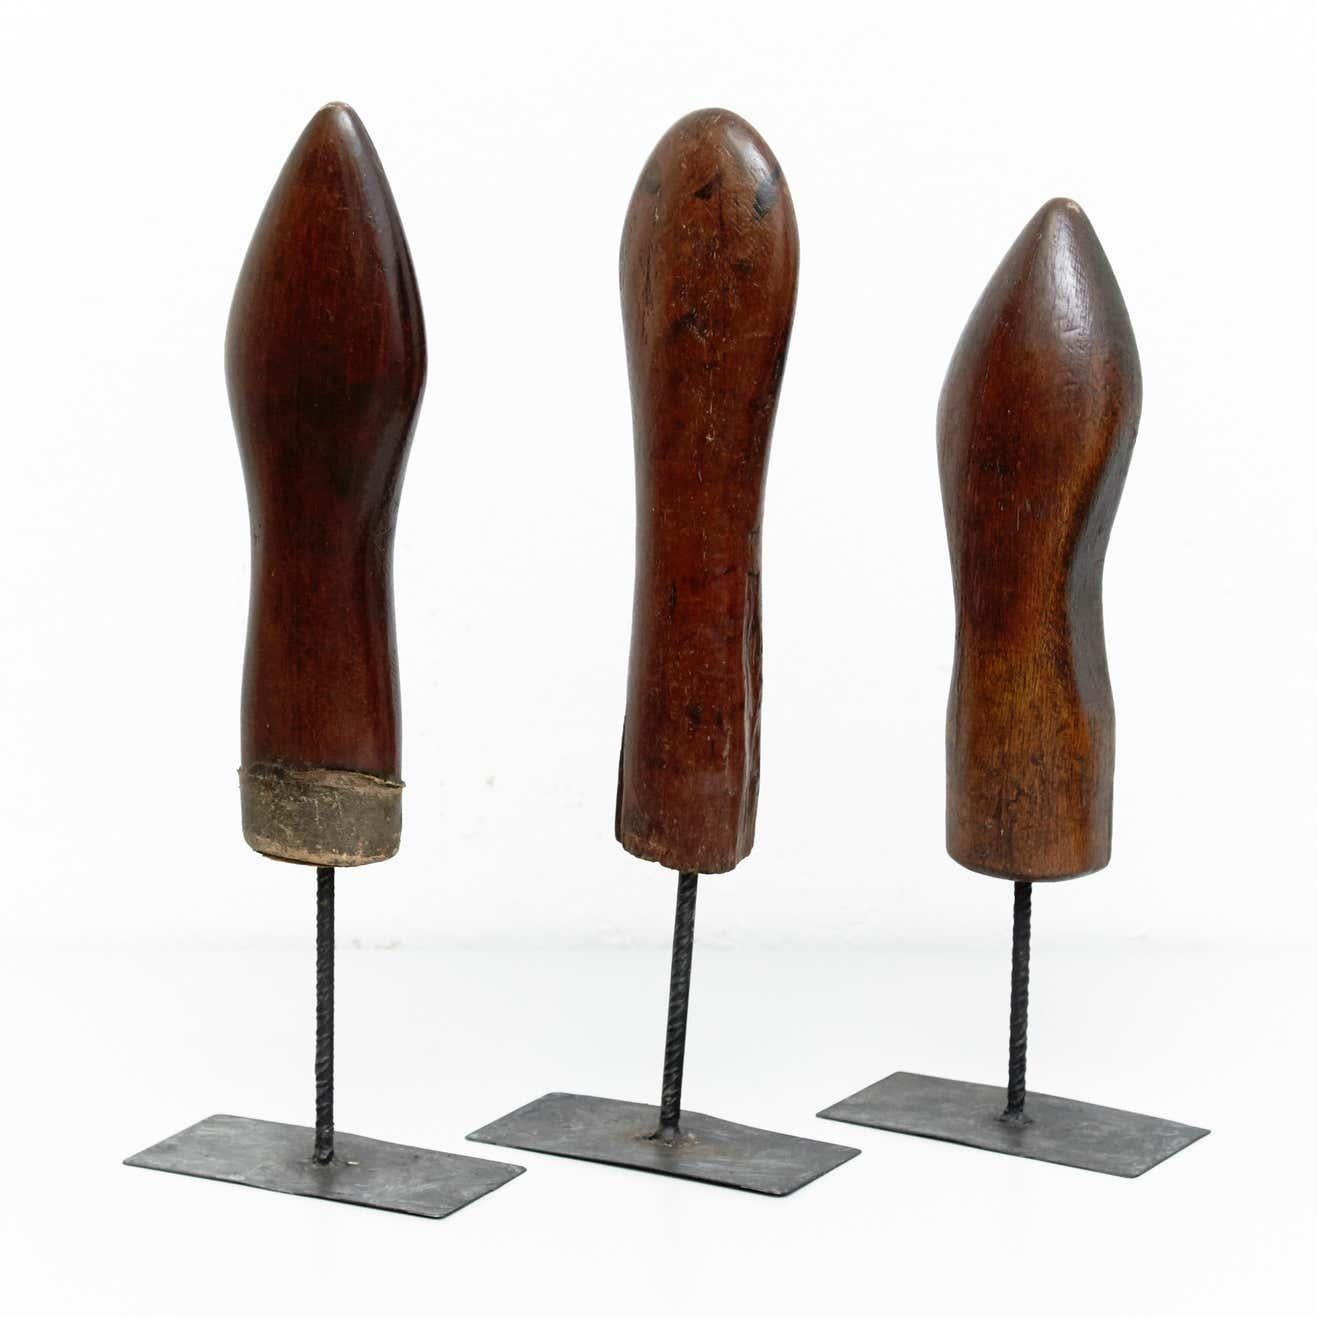 Mid-20th Century Set of 3 Mid-Century Modern Wood and Metal Sculptures, circa 1950 For Sale